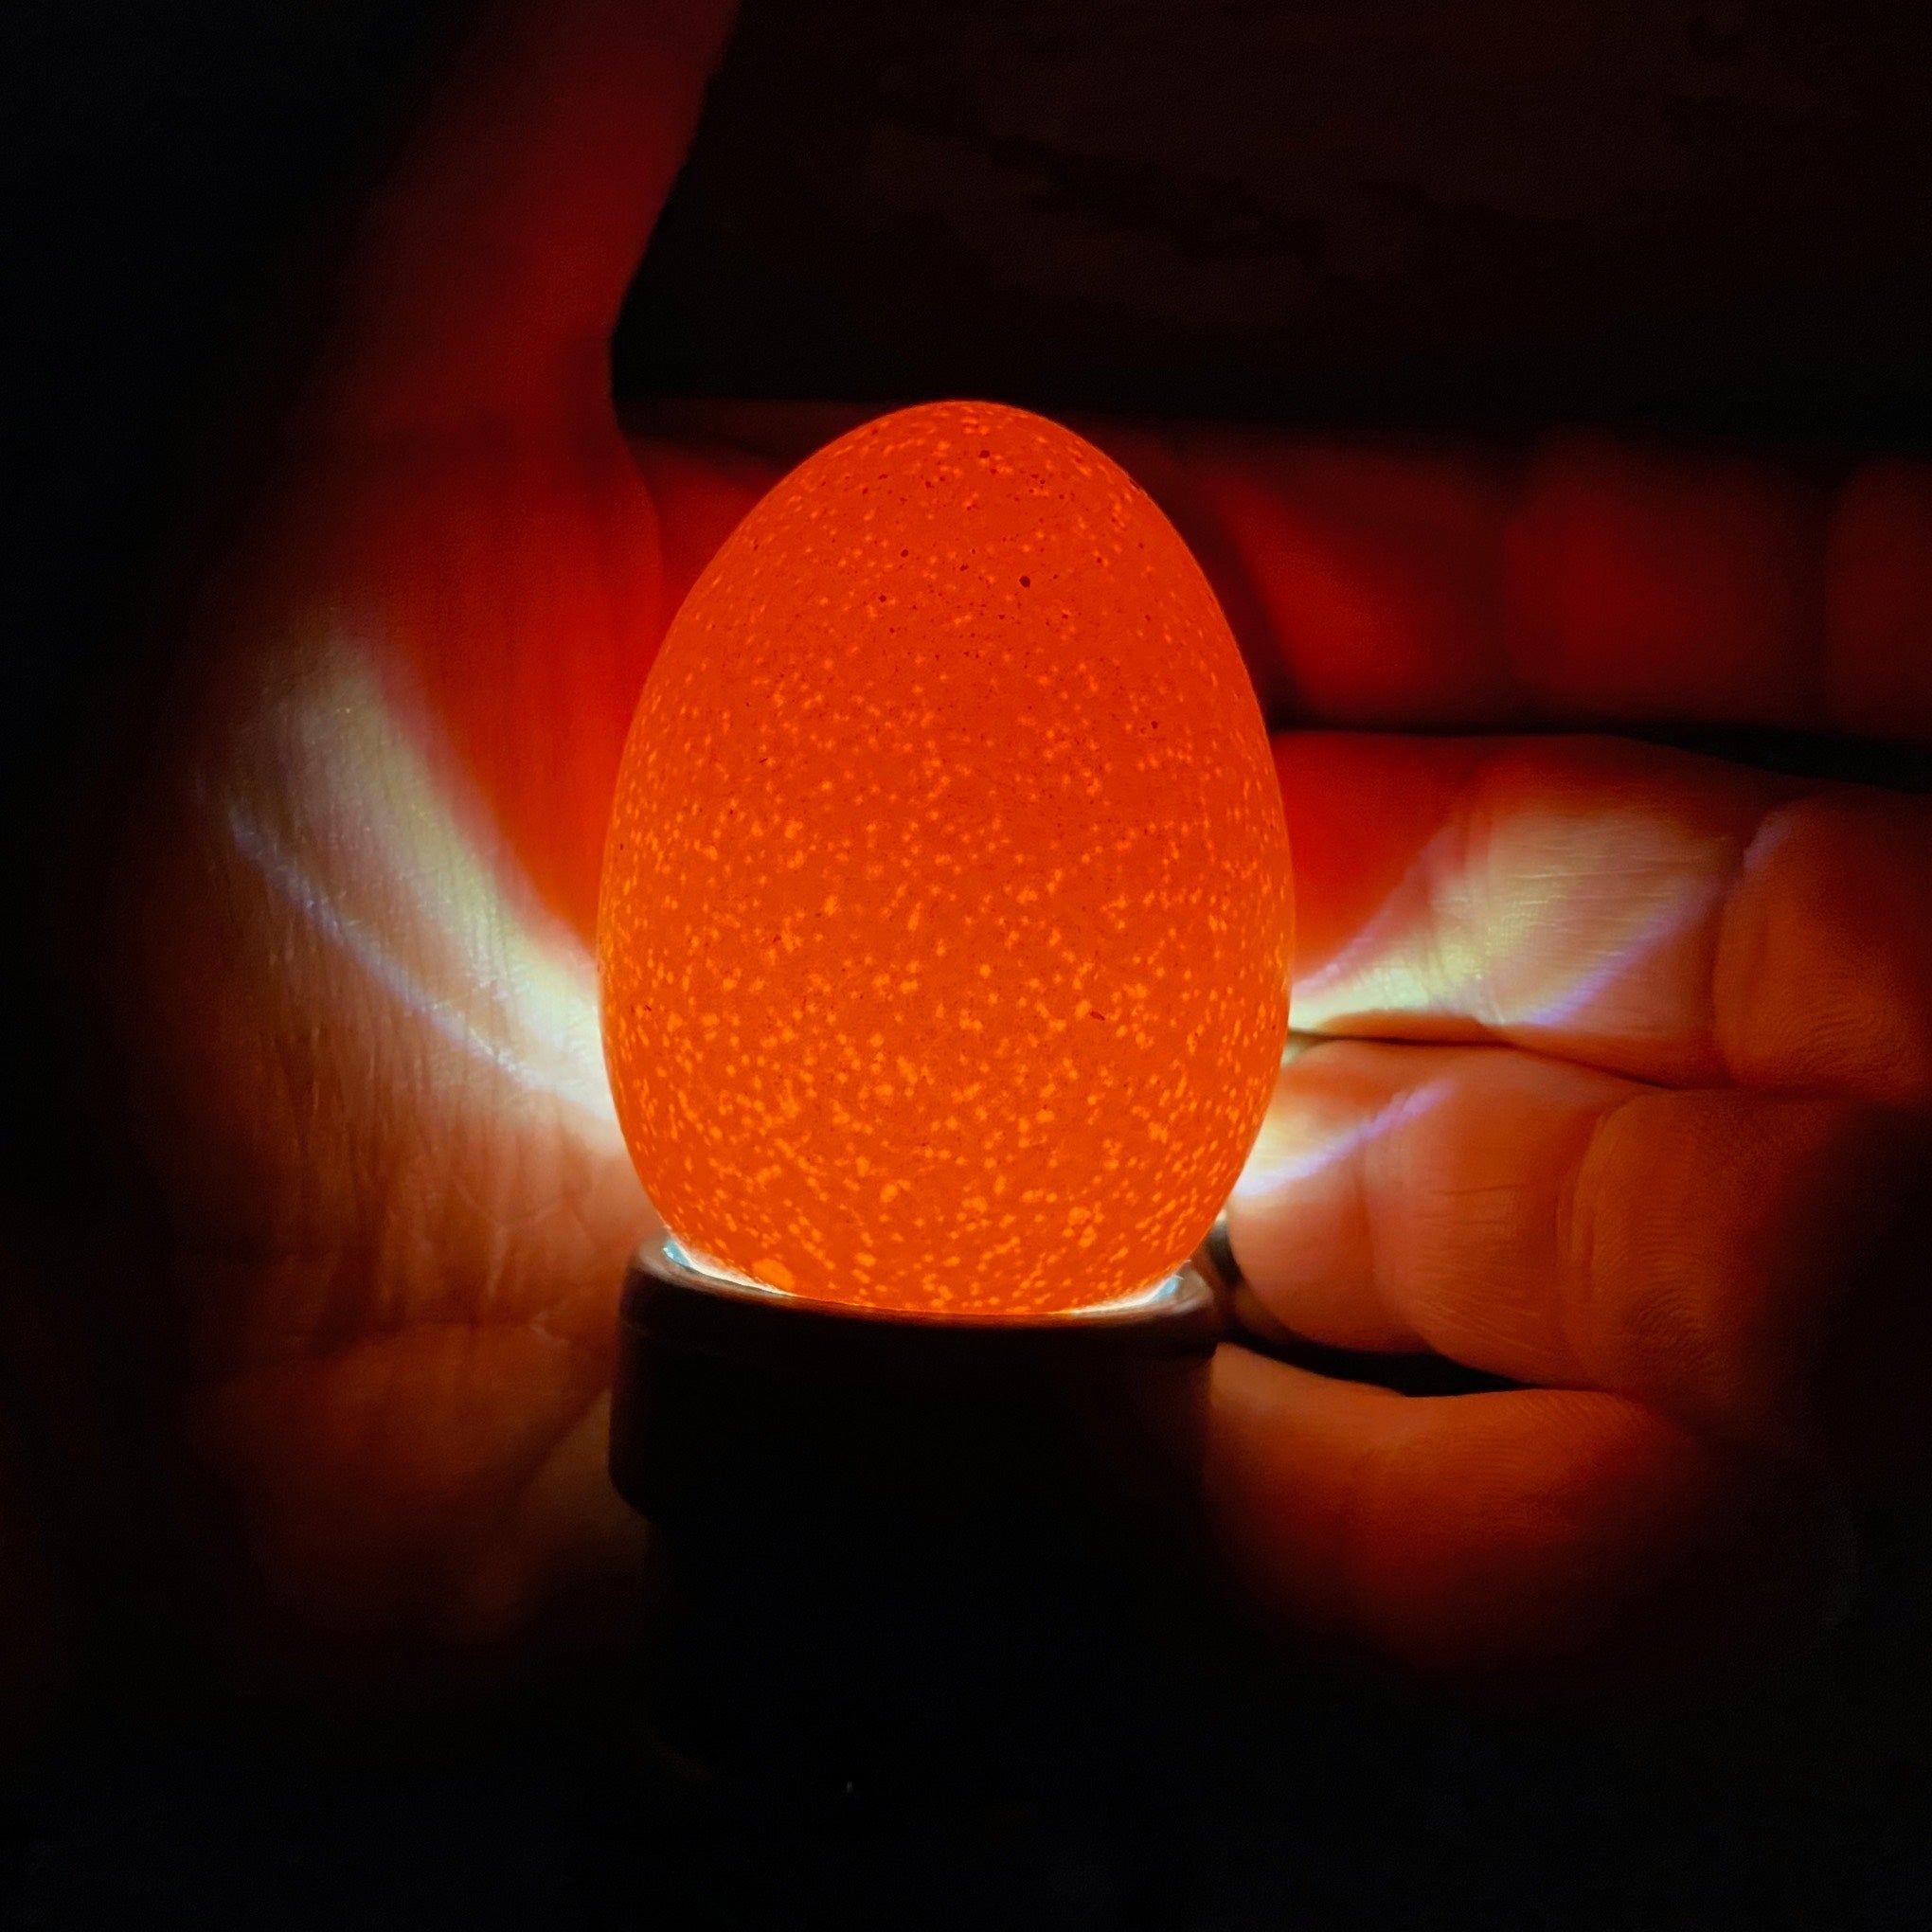 Hatching Time image of an egg being candled. showing the inside of the egg using a light. A hand is behind the egg.